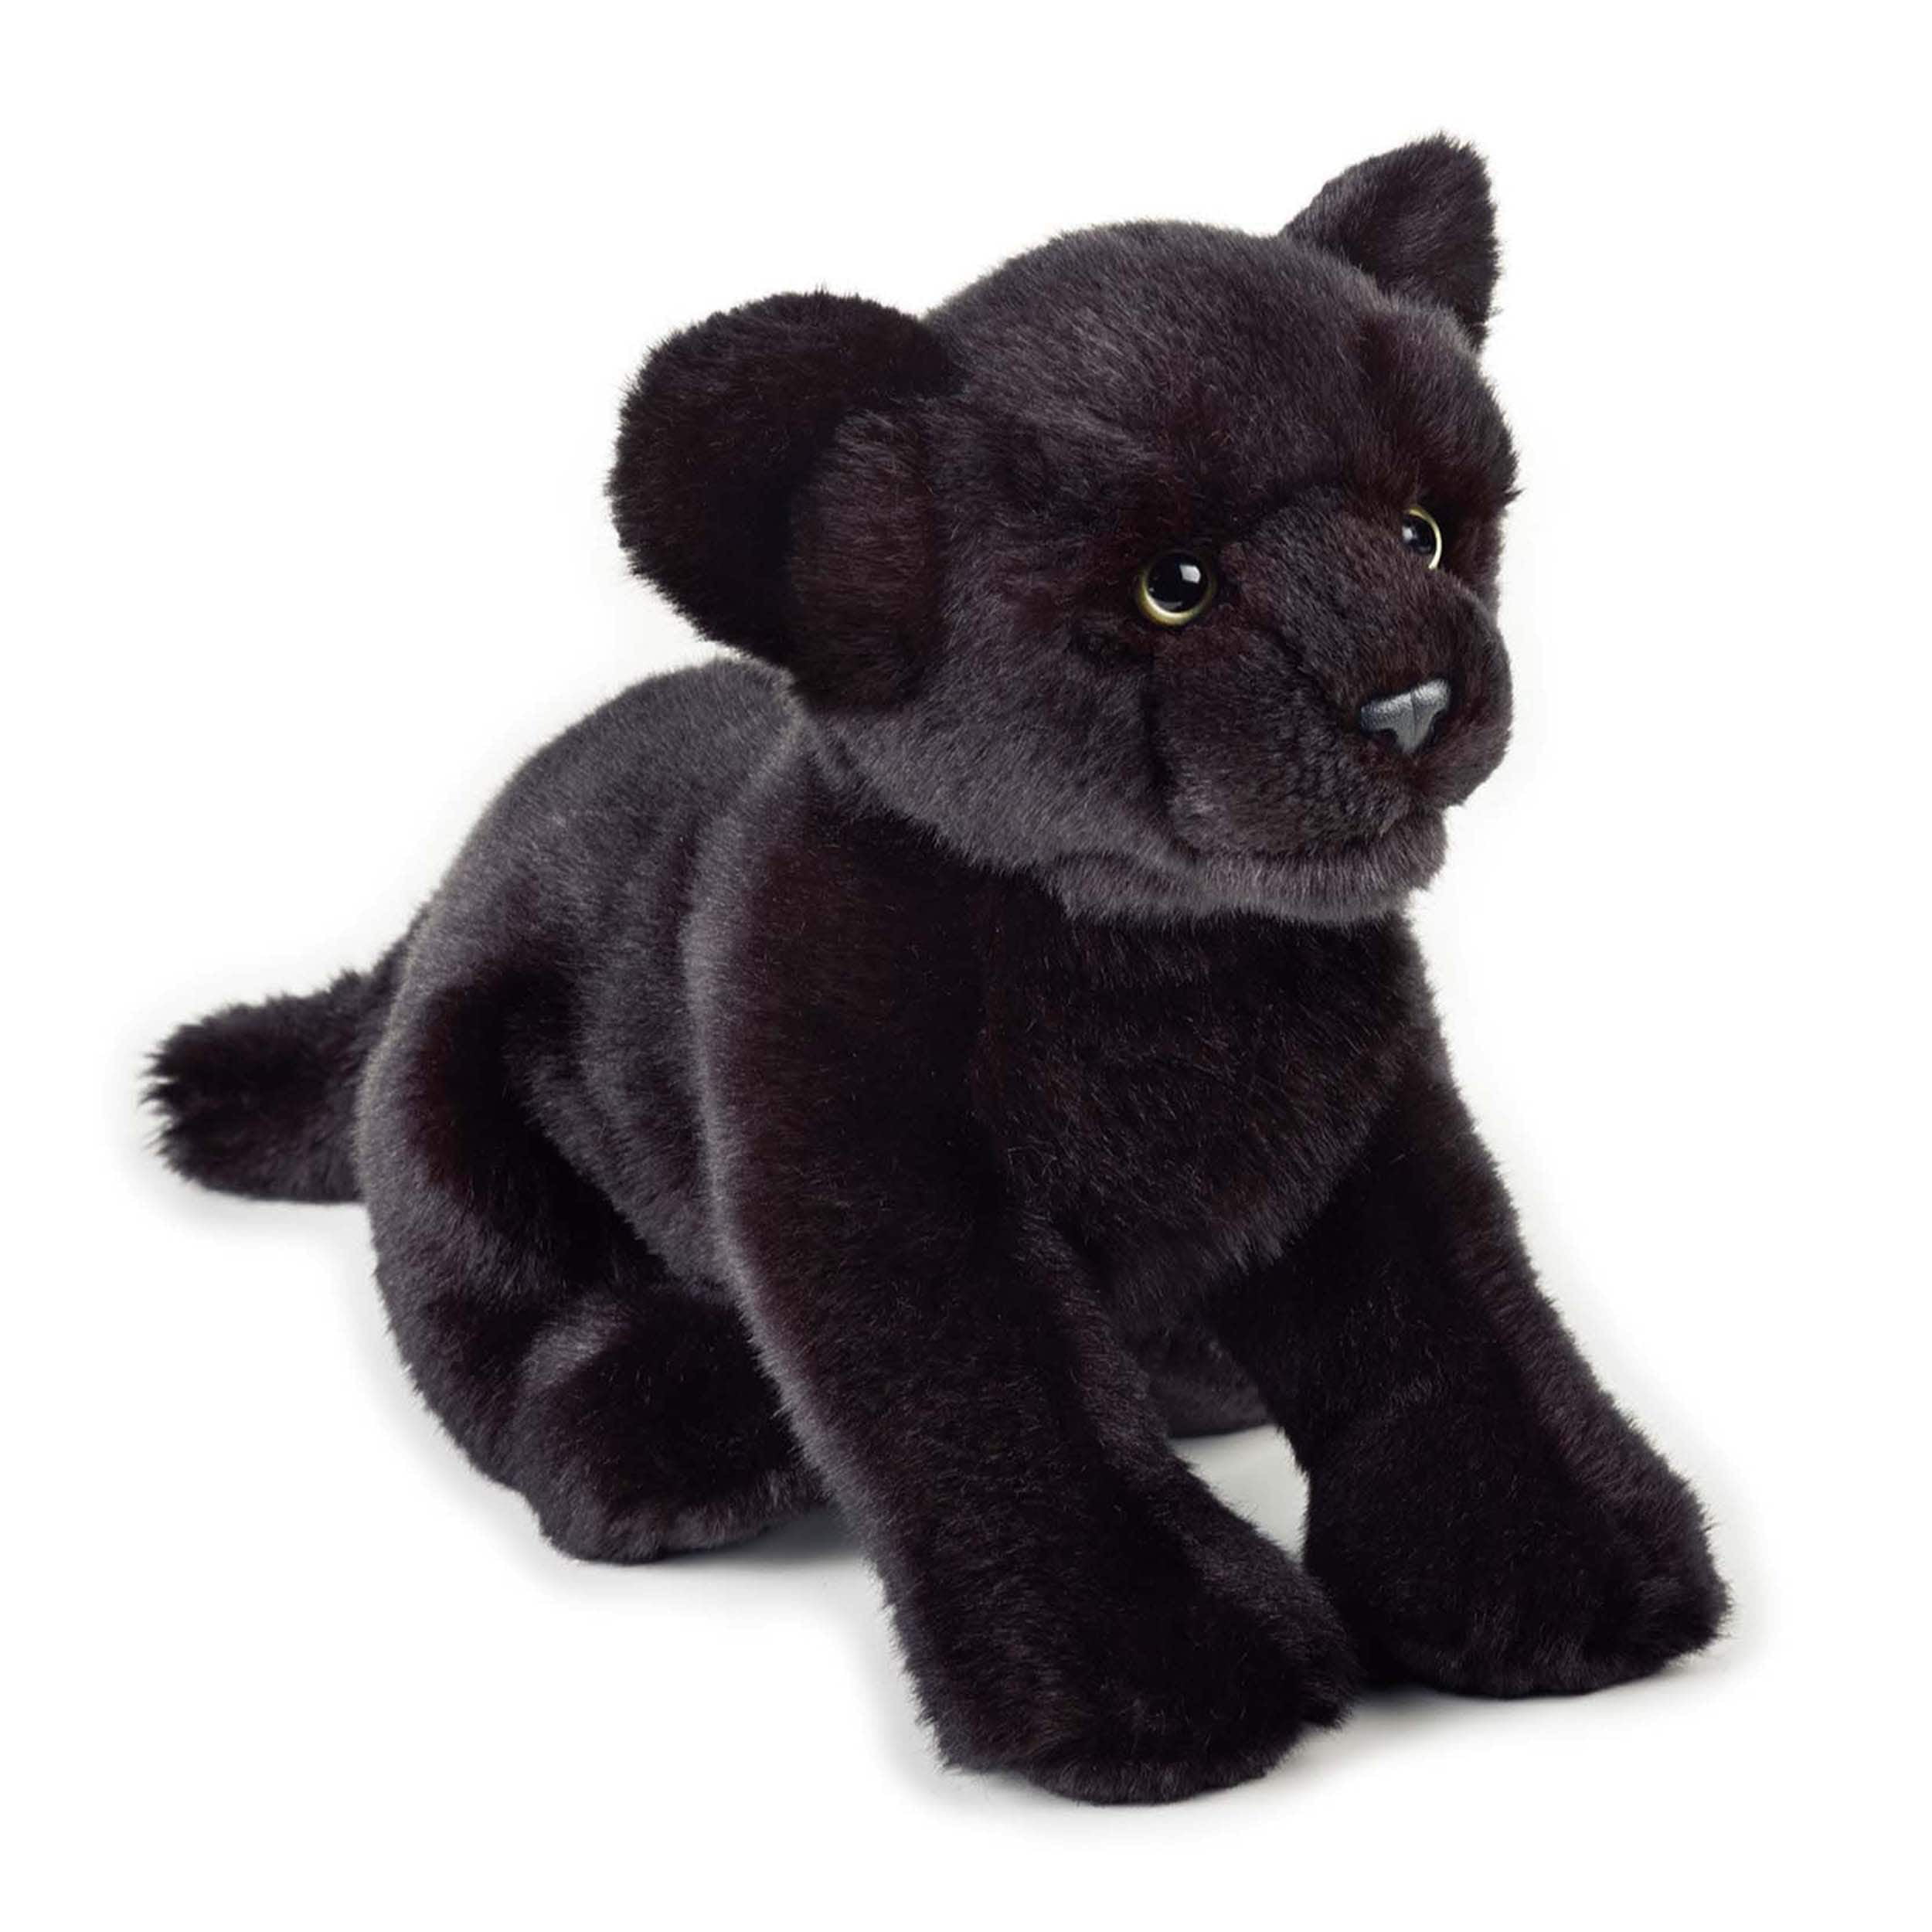 Lelly National Geographic Plush, Black 